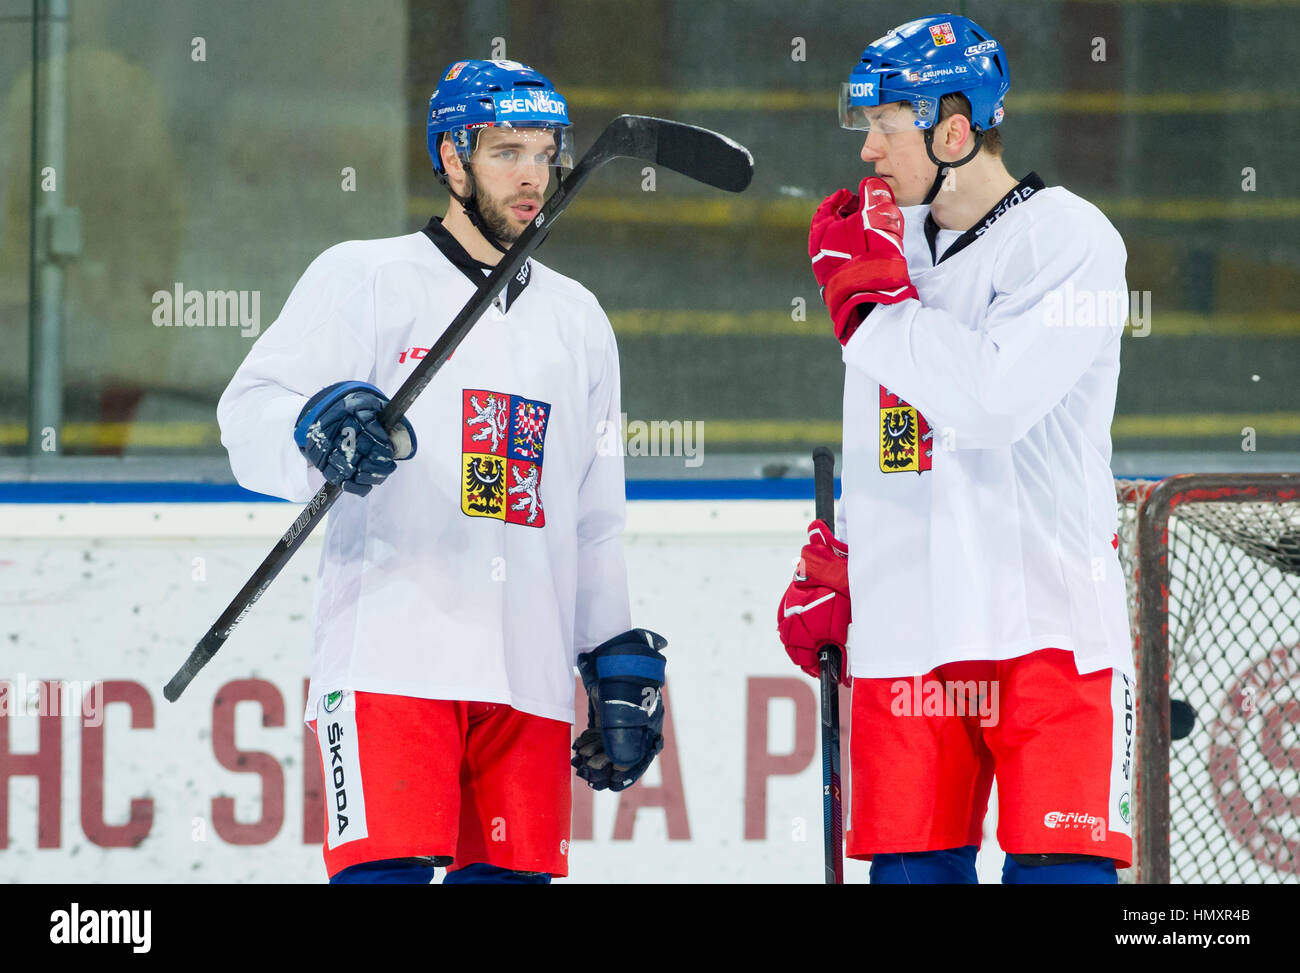 Prague, Czech Republic. 07th Feb, 2017. The Czech national ice-hockey team's players Michal Vondrka (left) and Lukas Radil in action during the training session prior to the February Sweden Games in Gothenburg in Prague, Czech Republic, February 7, 2017. Sweden Games, the third part of the European Hockey Tour (EHT) series, will take place on February 9-12. Credit: Vit Simanek/CTK Photo/Alamy Live News Stock Photo